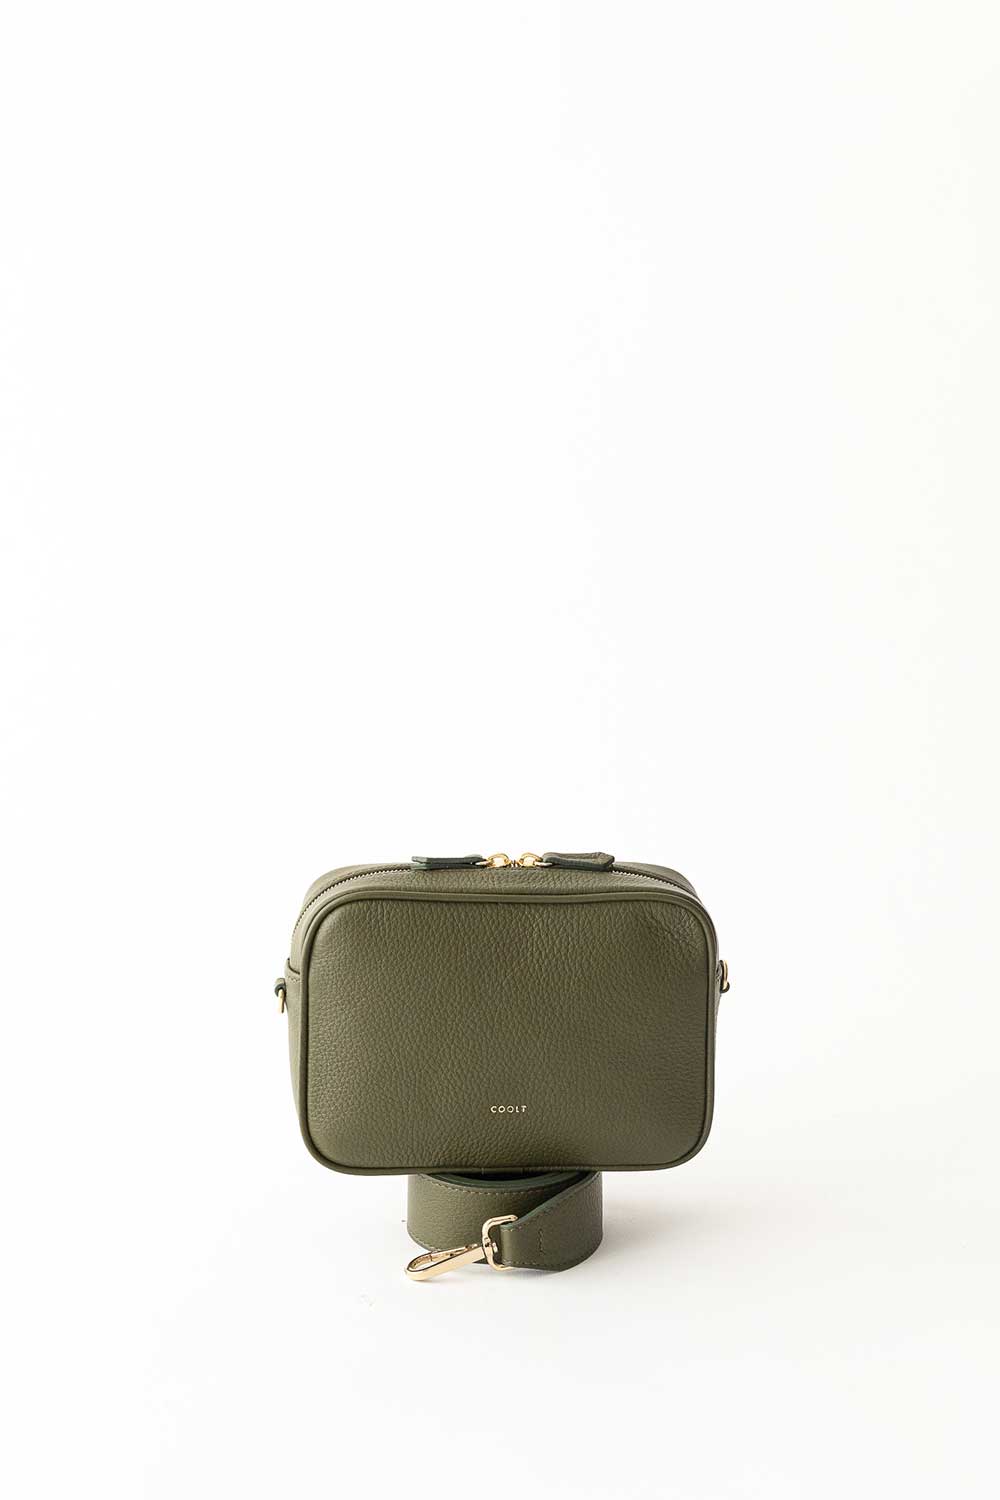 coolt, camera bag mignon olive, fashion made in italy